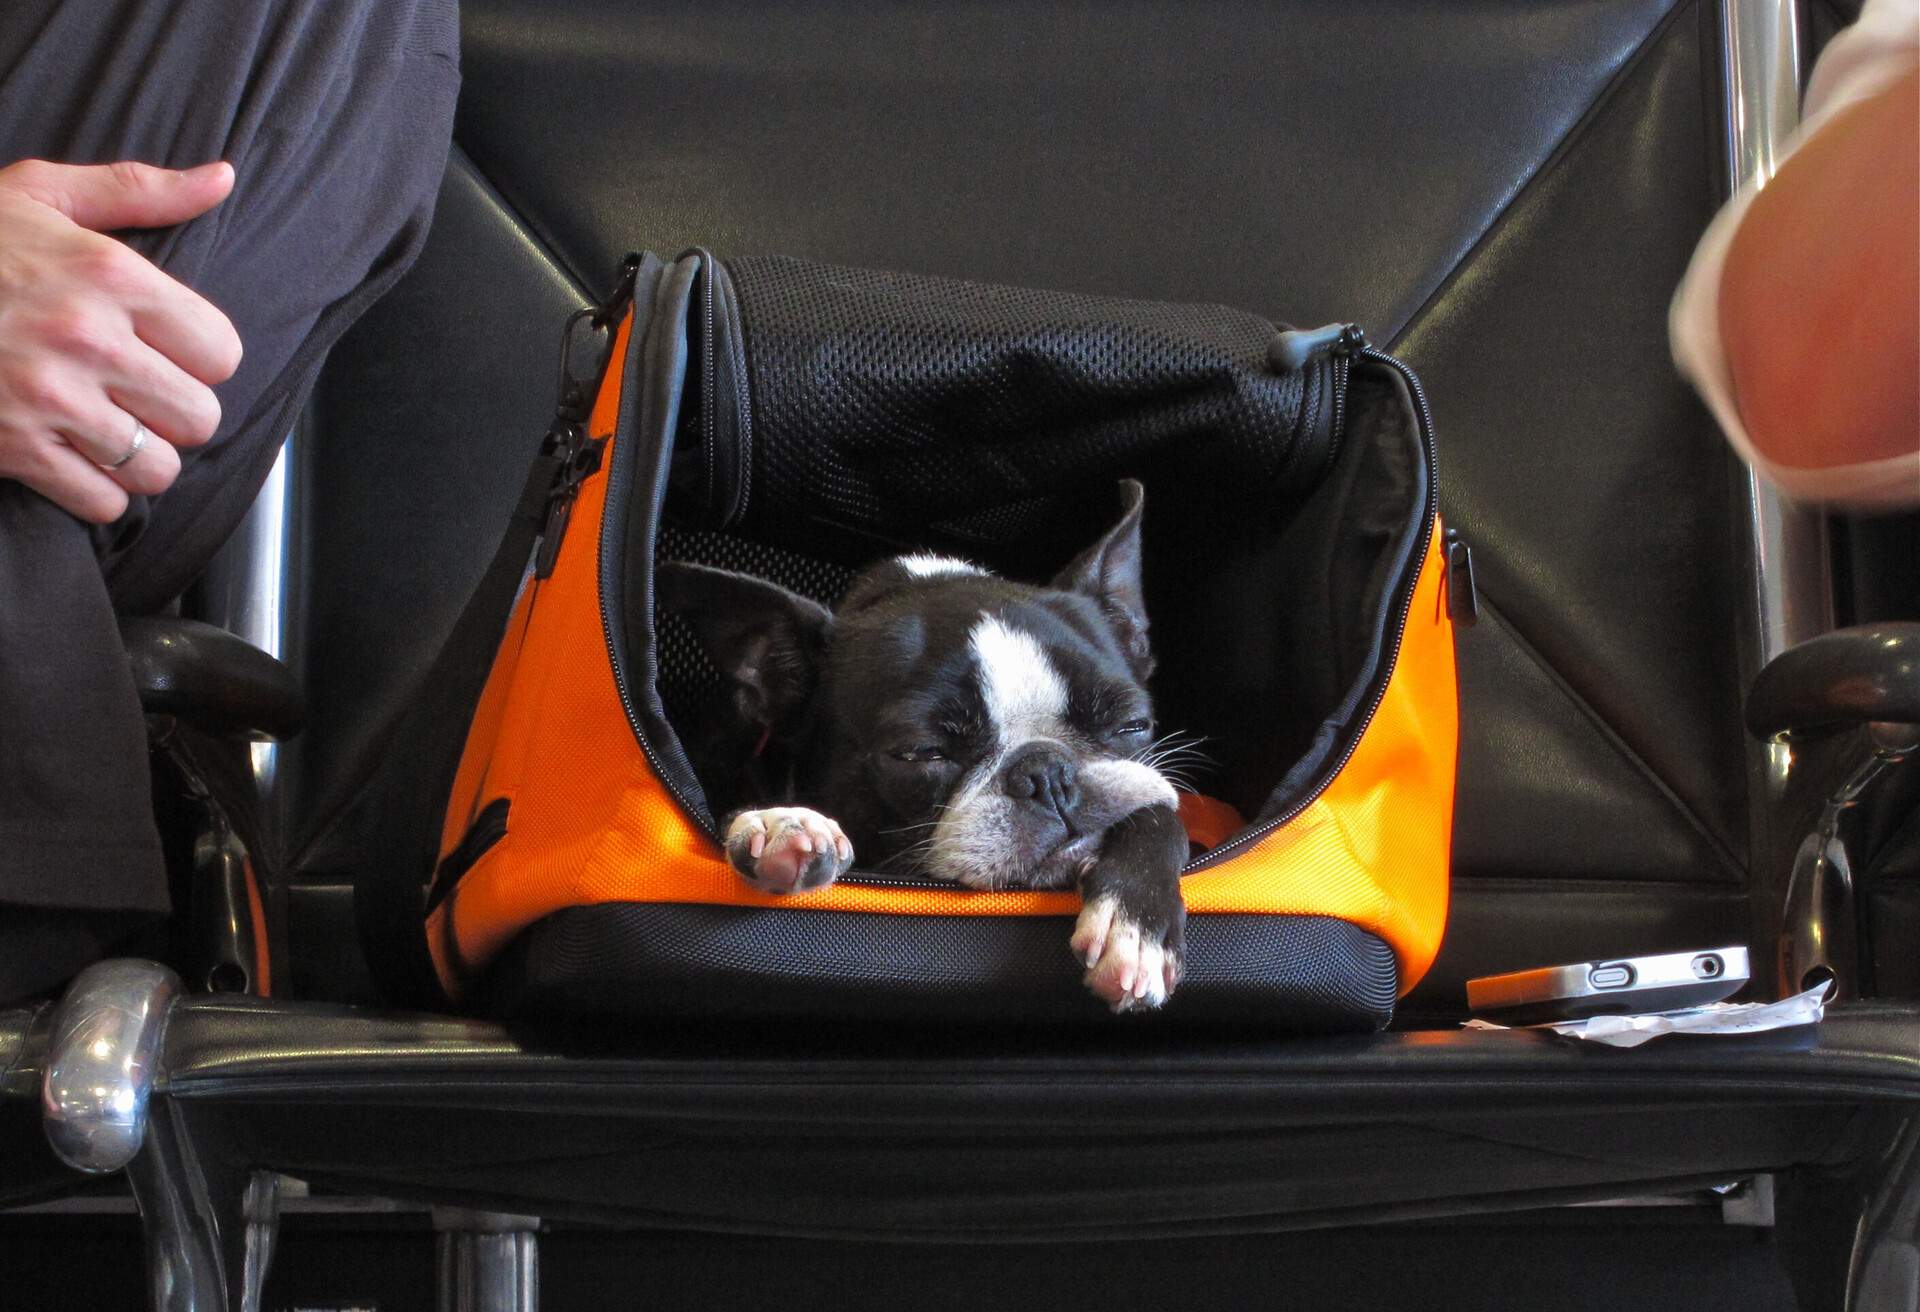 Dog waits in its carry-on container at airport in Atlanta, Georgia.